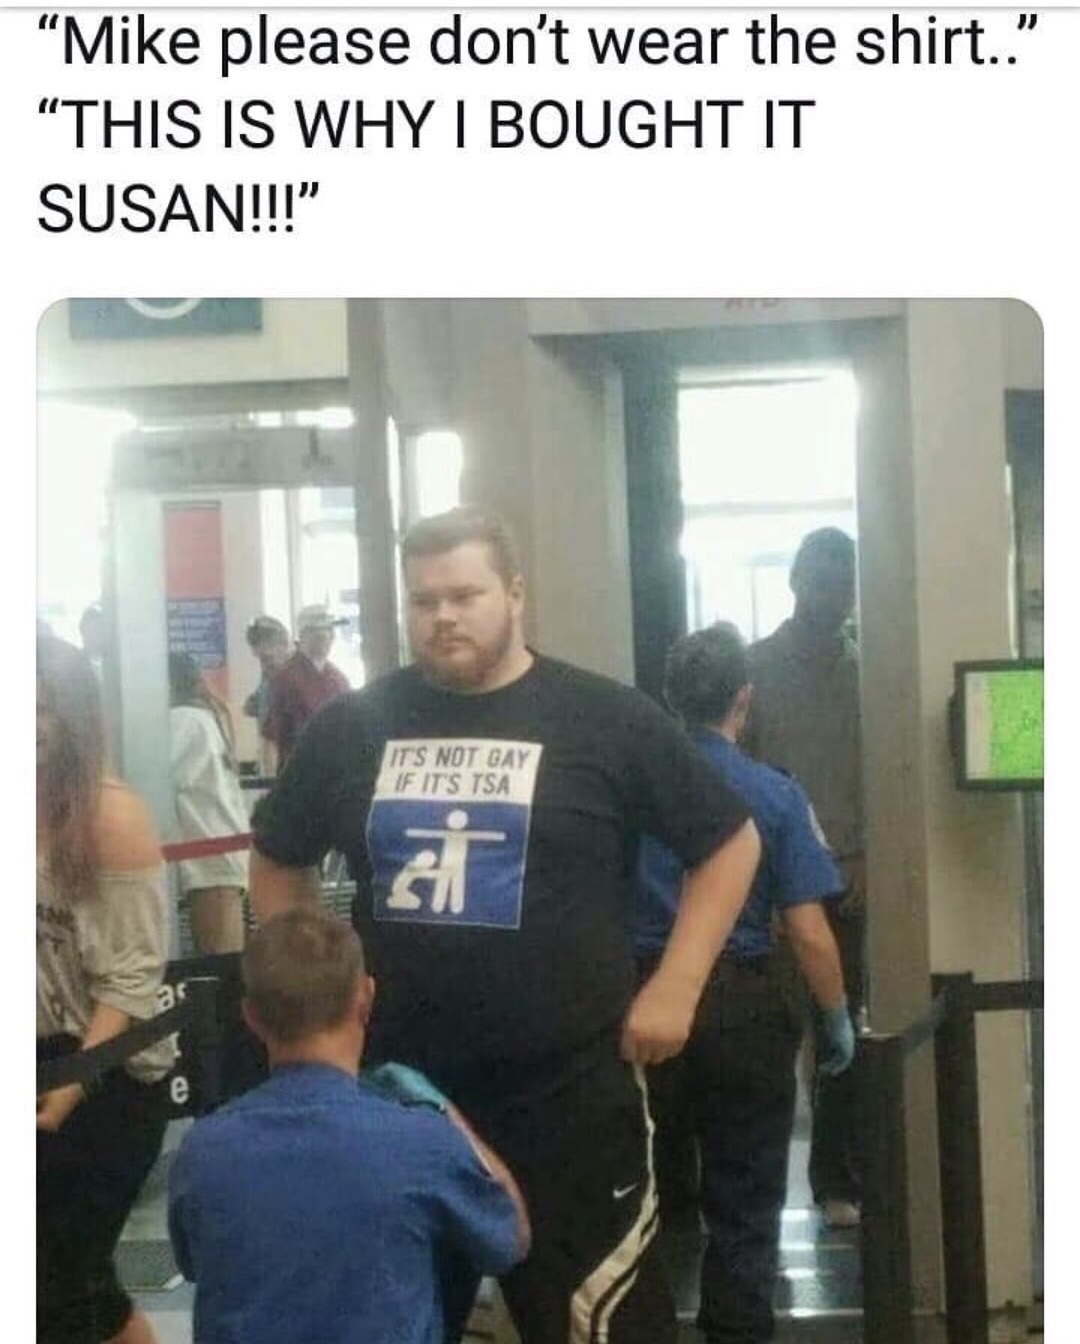 memes - it's not gay if it's tsa meme - "Mike please don't wear the shirt.." "This Is Why I Bought It Susan!!!" It'S Not Gay If It'S Tsa